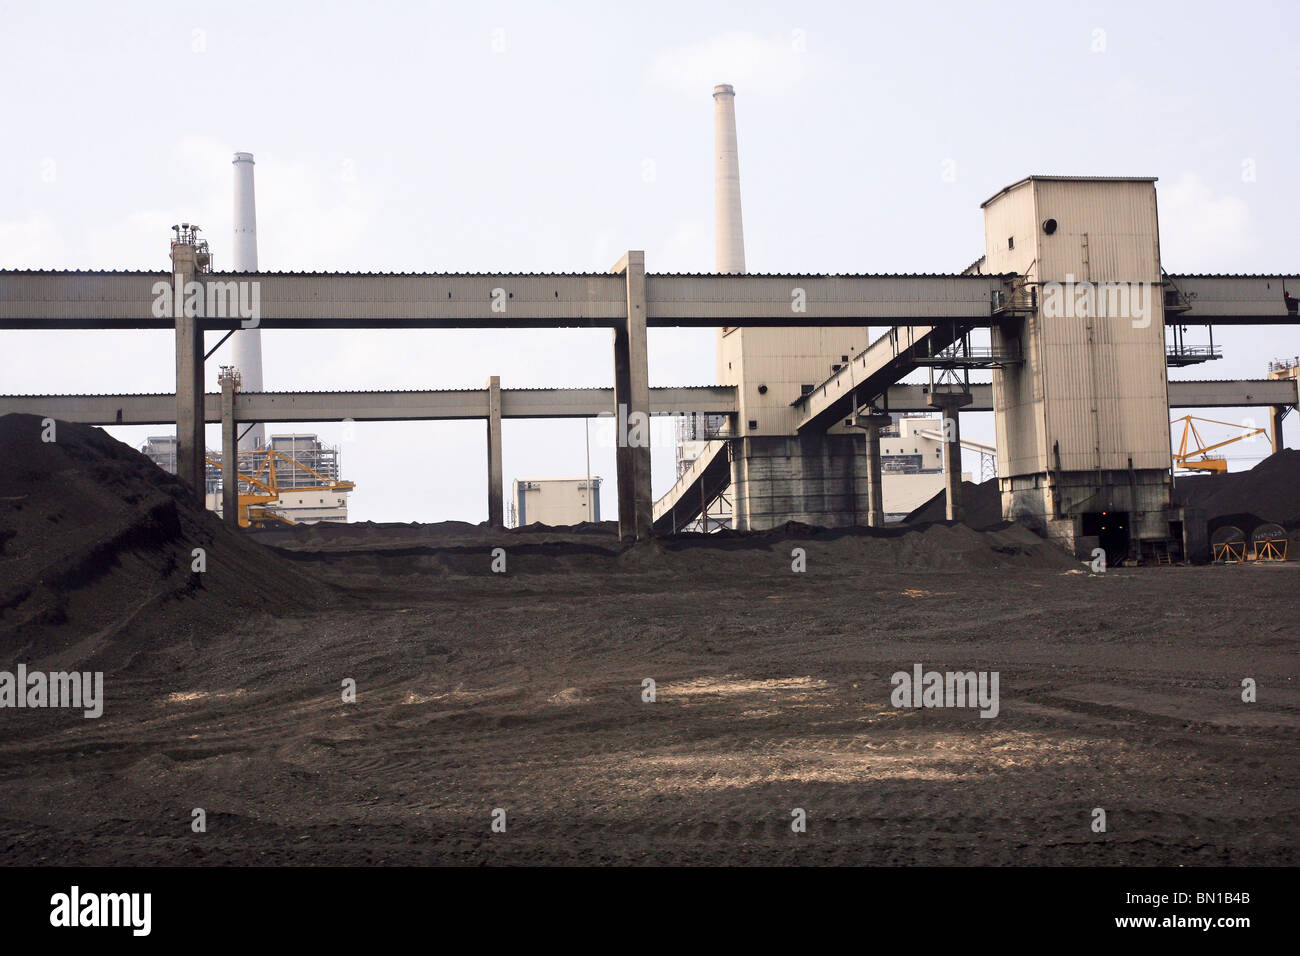 Israel, Hadera, Coal storage for the coal operated power plant Stock Photo